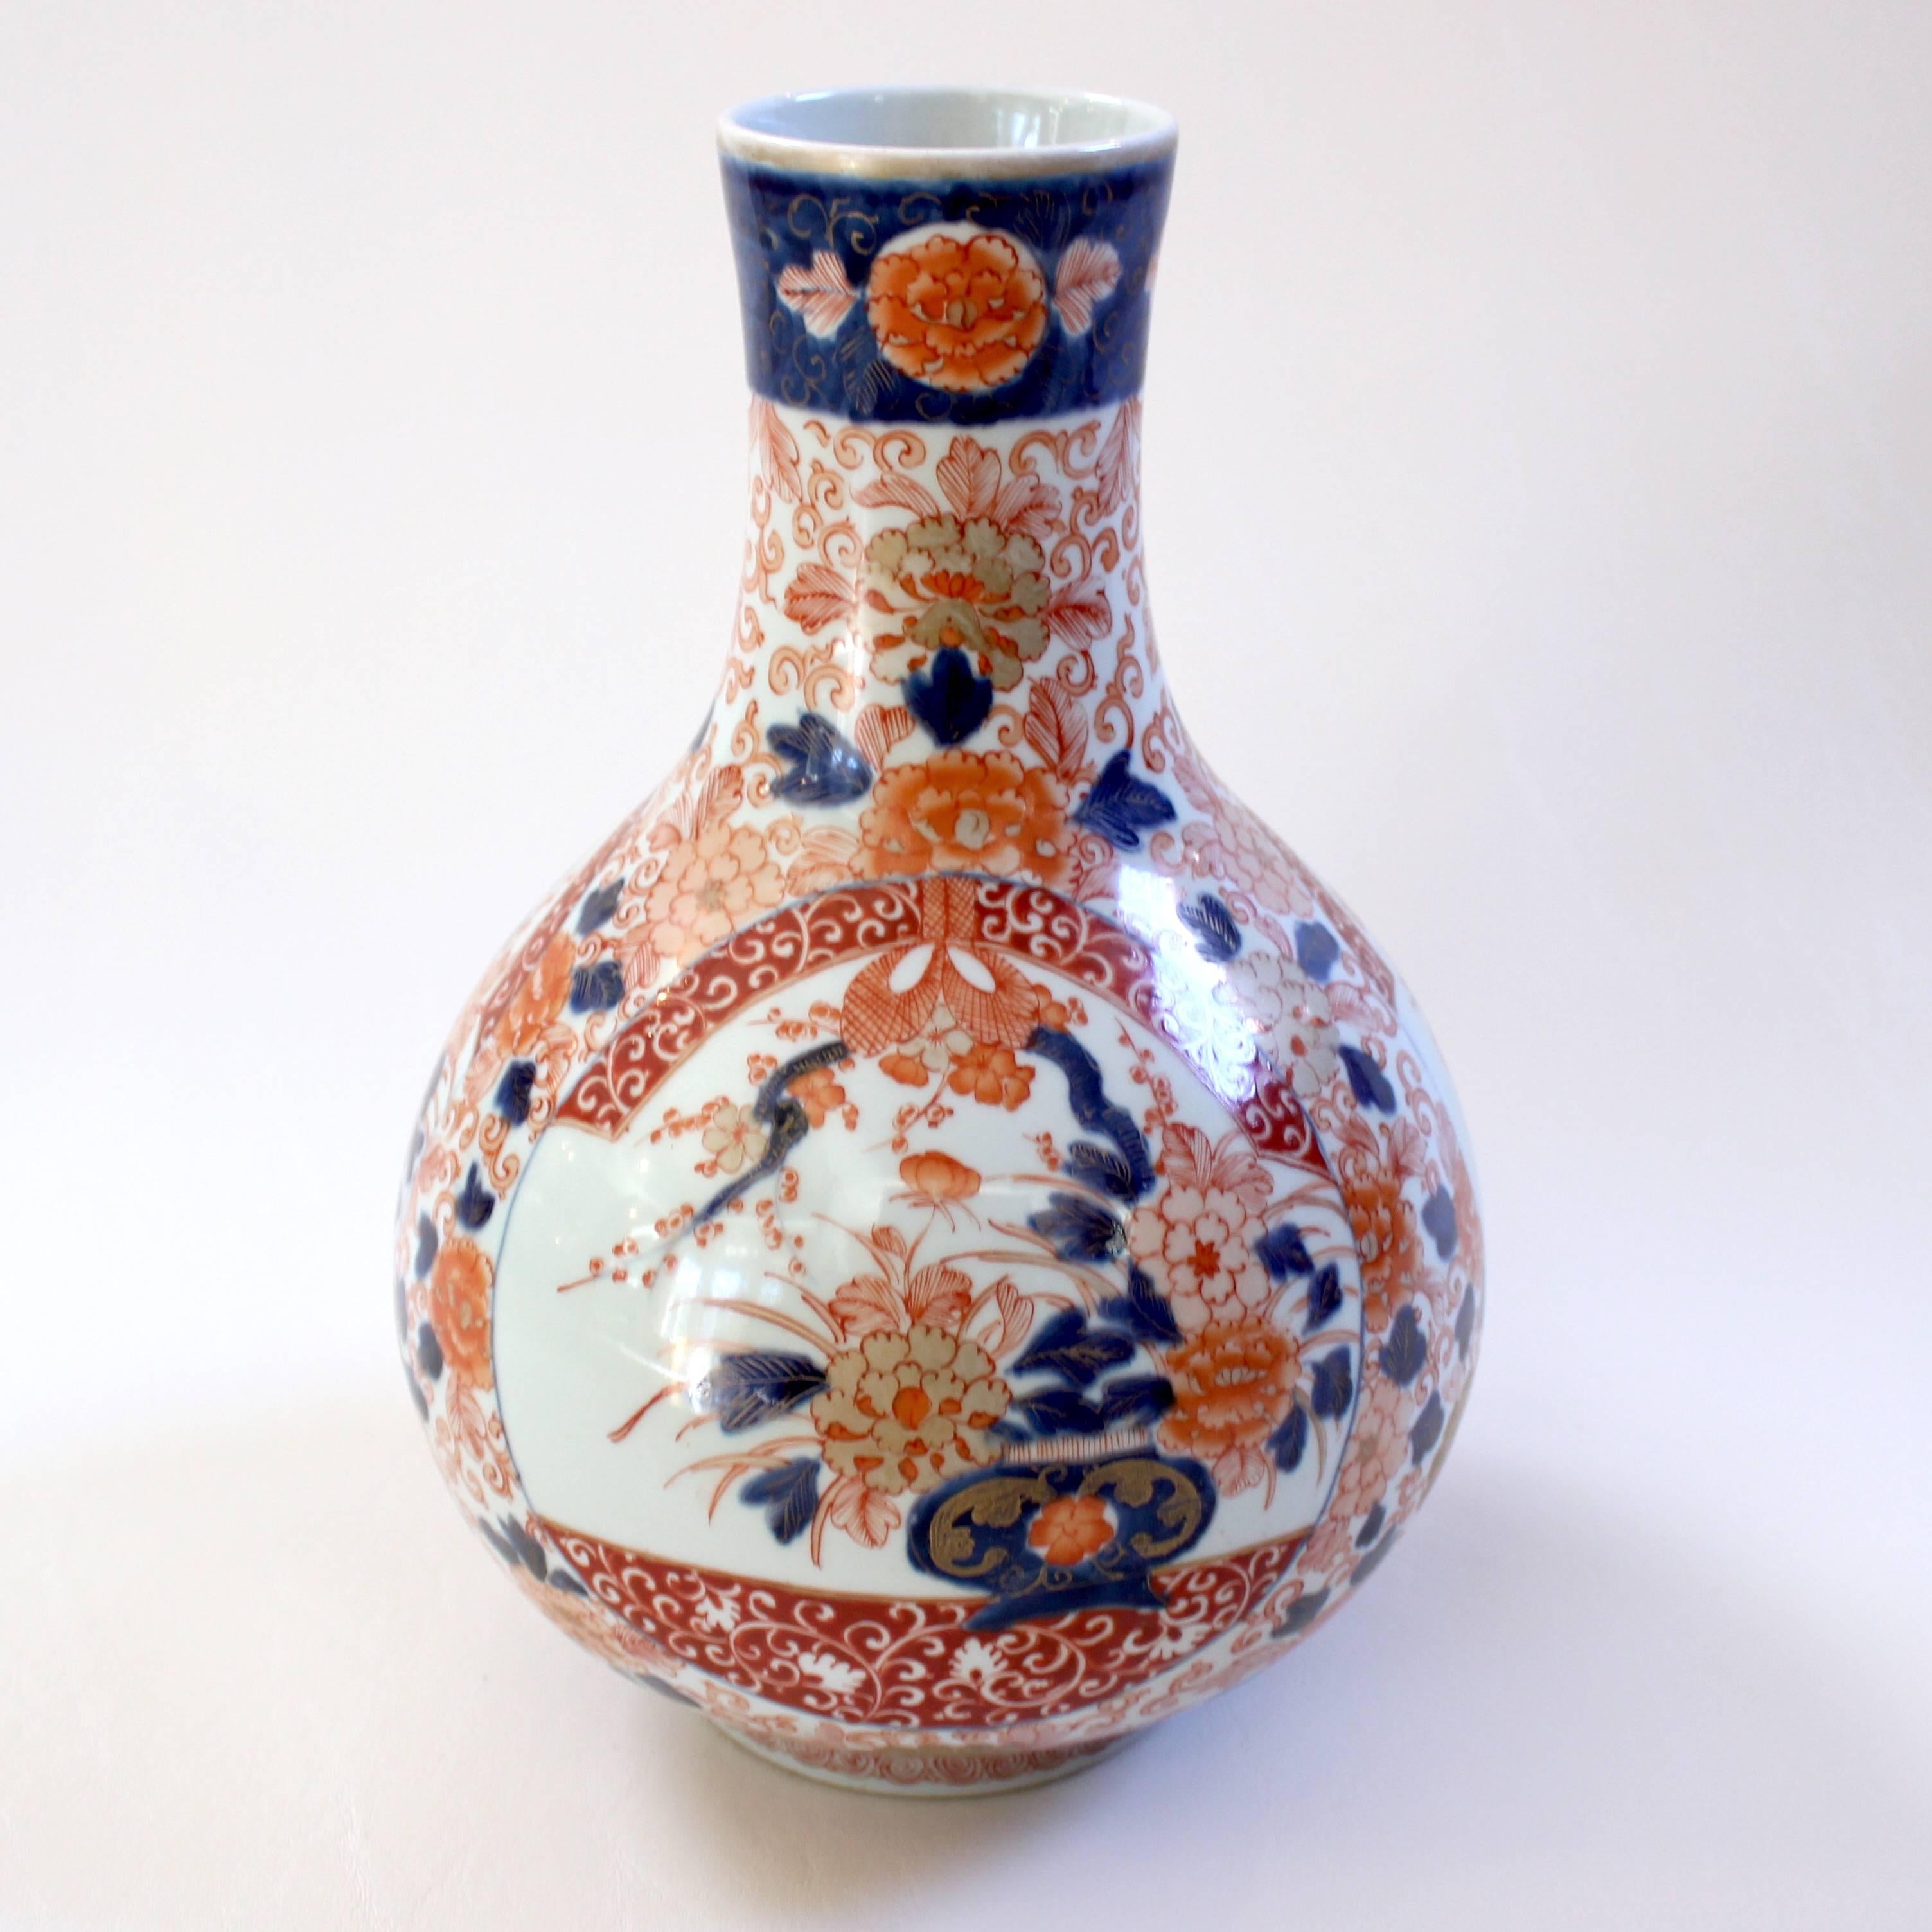 Early 20th century hand-painted Japanese Imari vase, circa 1915, decorated in blue, red and gold.